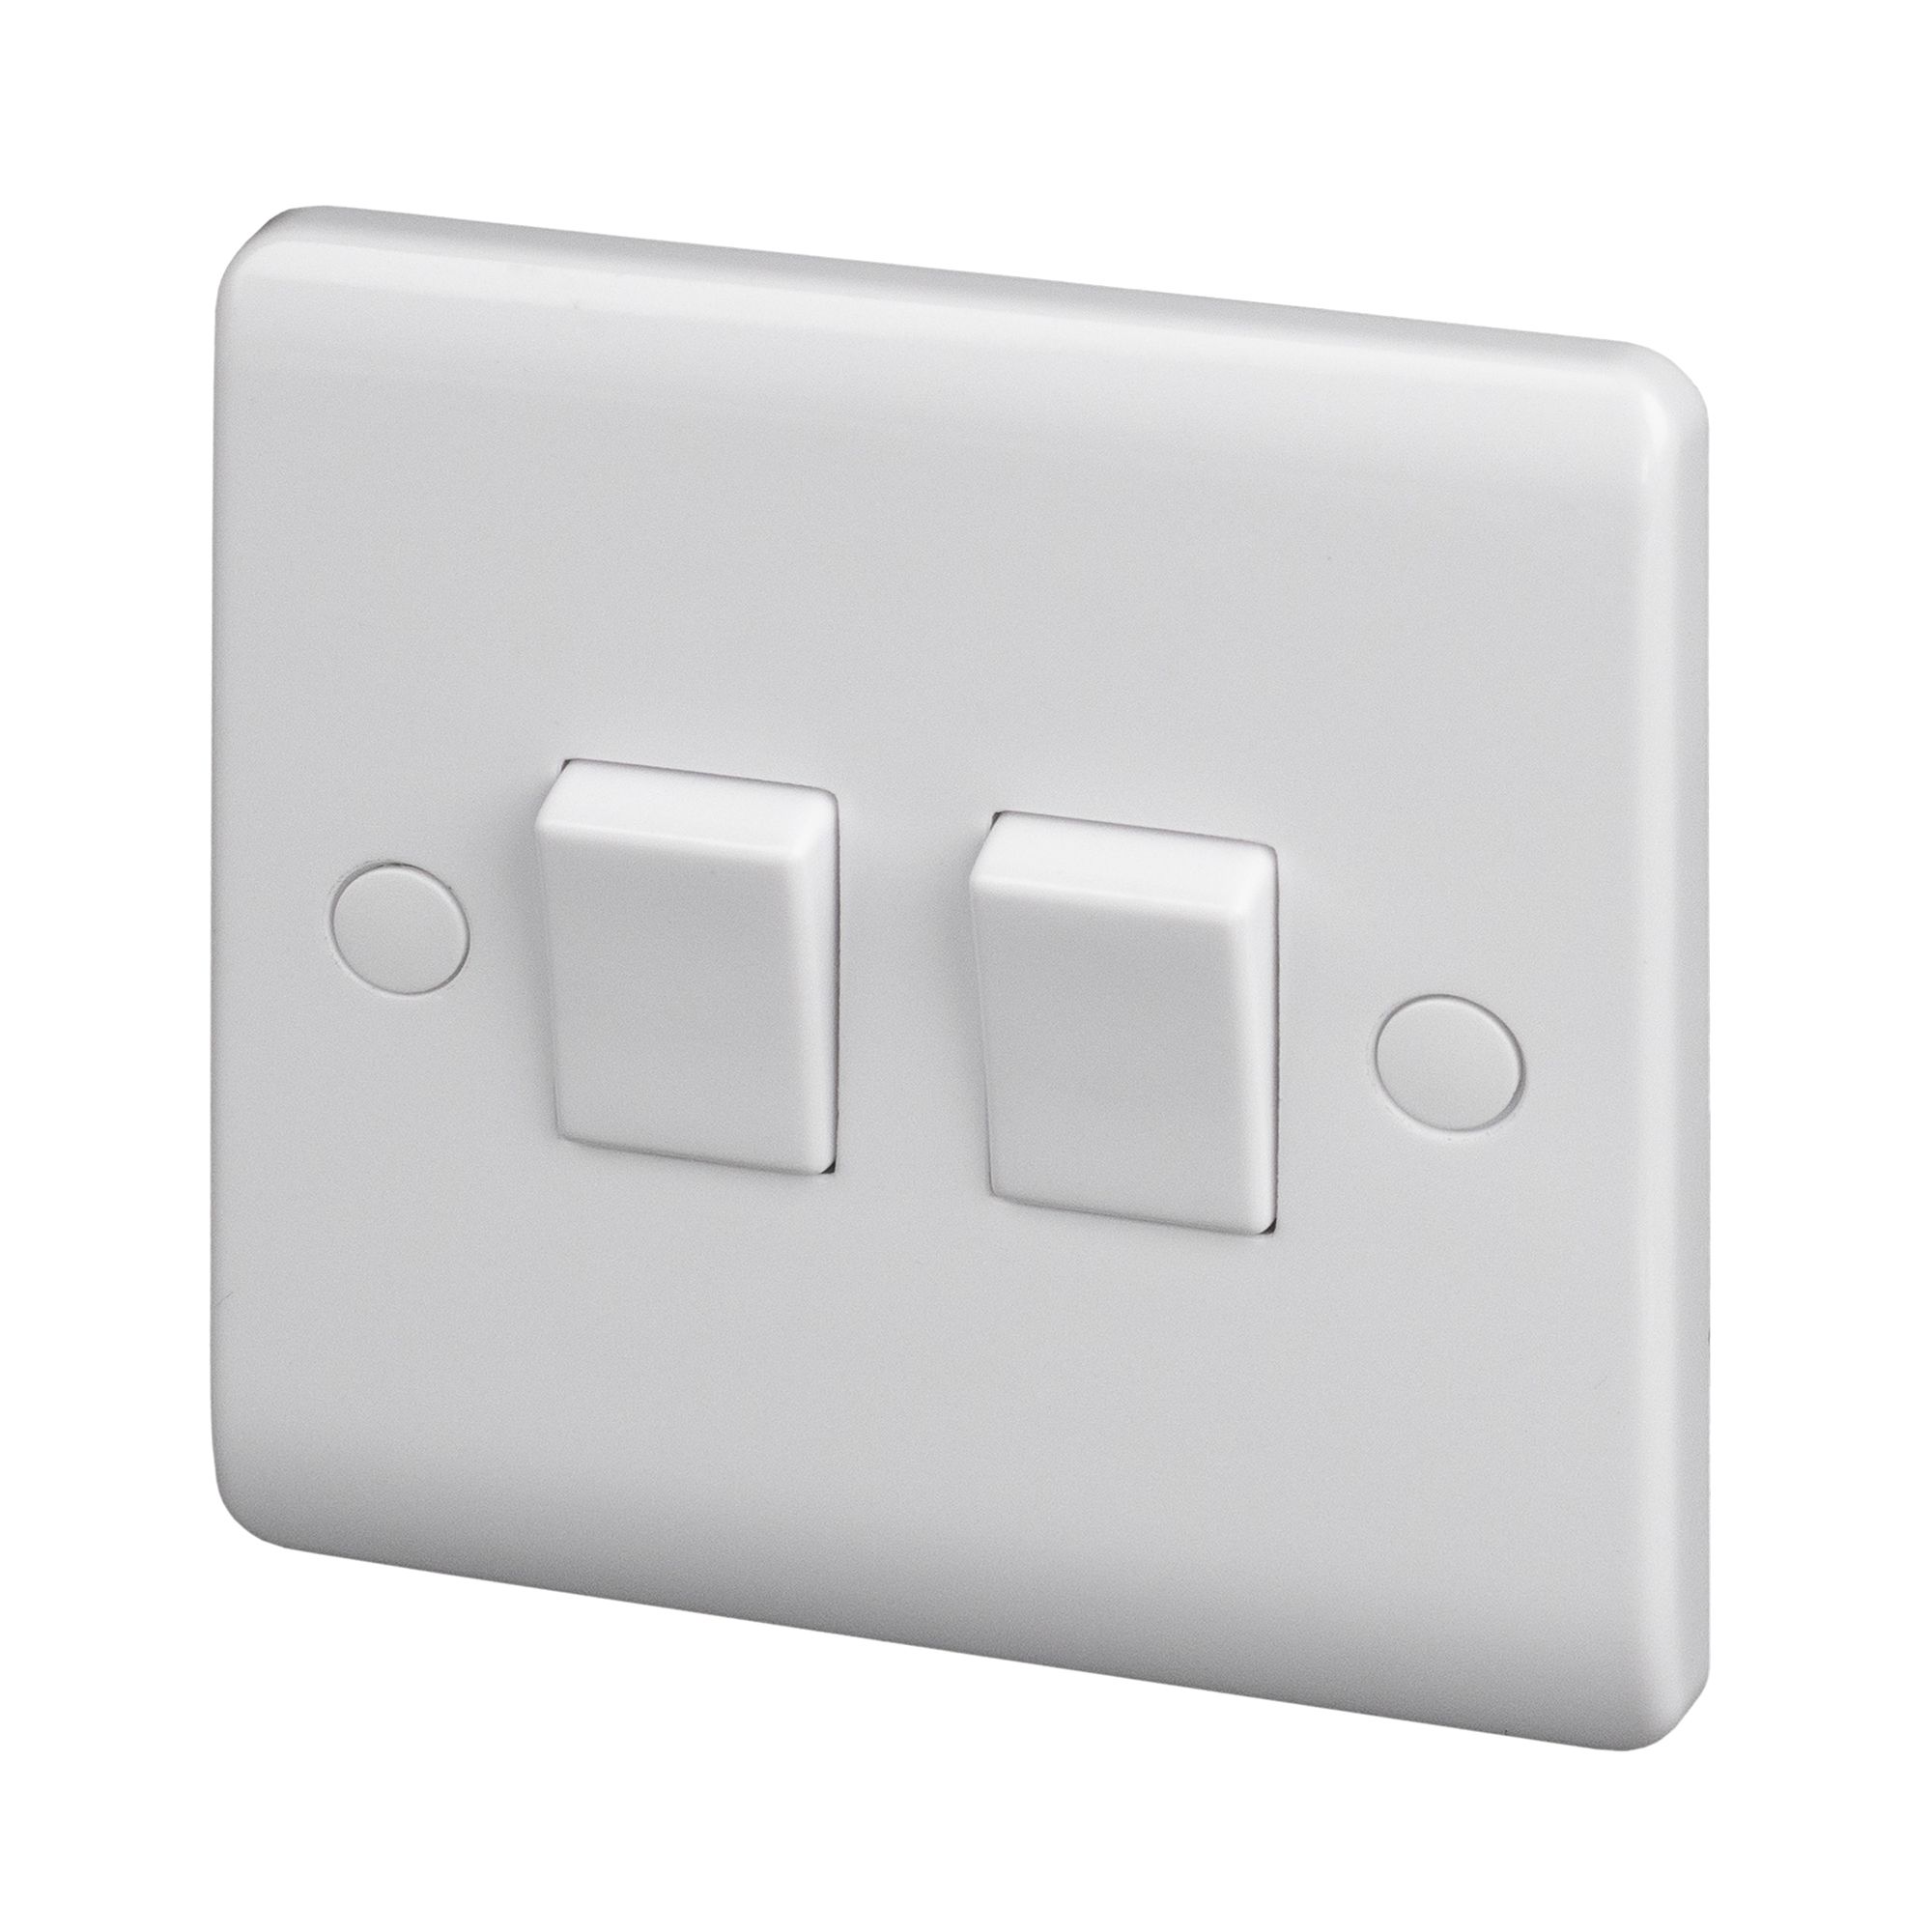 https://media.diy.com/is/image/Kingfisher/lap-white-10a-2-way-2-gang-raised-slim-light-switch~05301447_01c?$MOB_PREV$&$width=618&$height=618